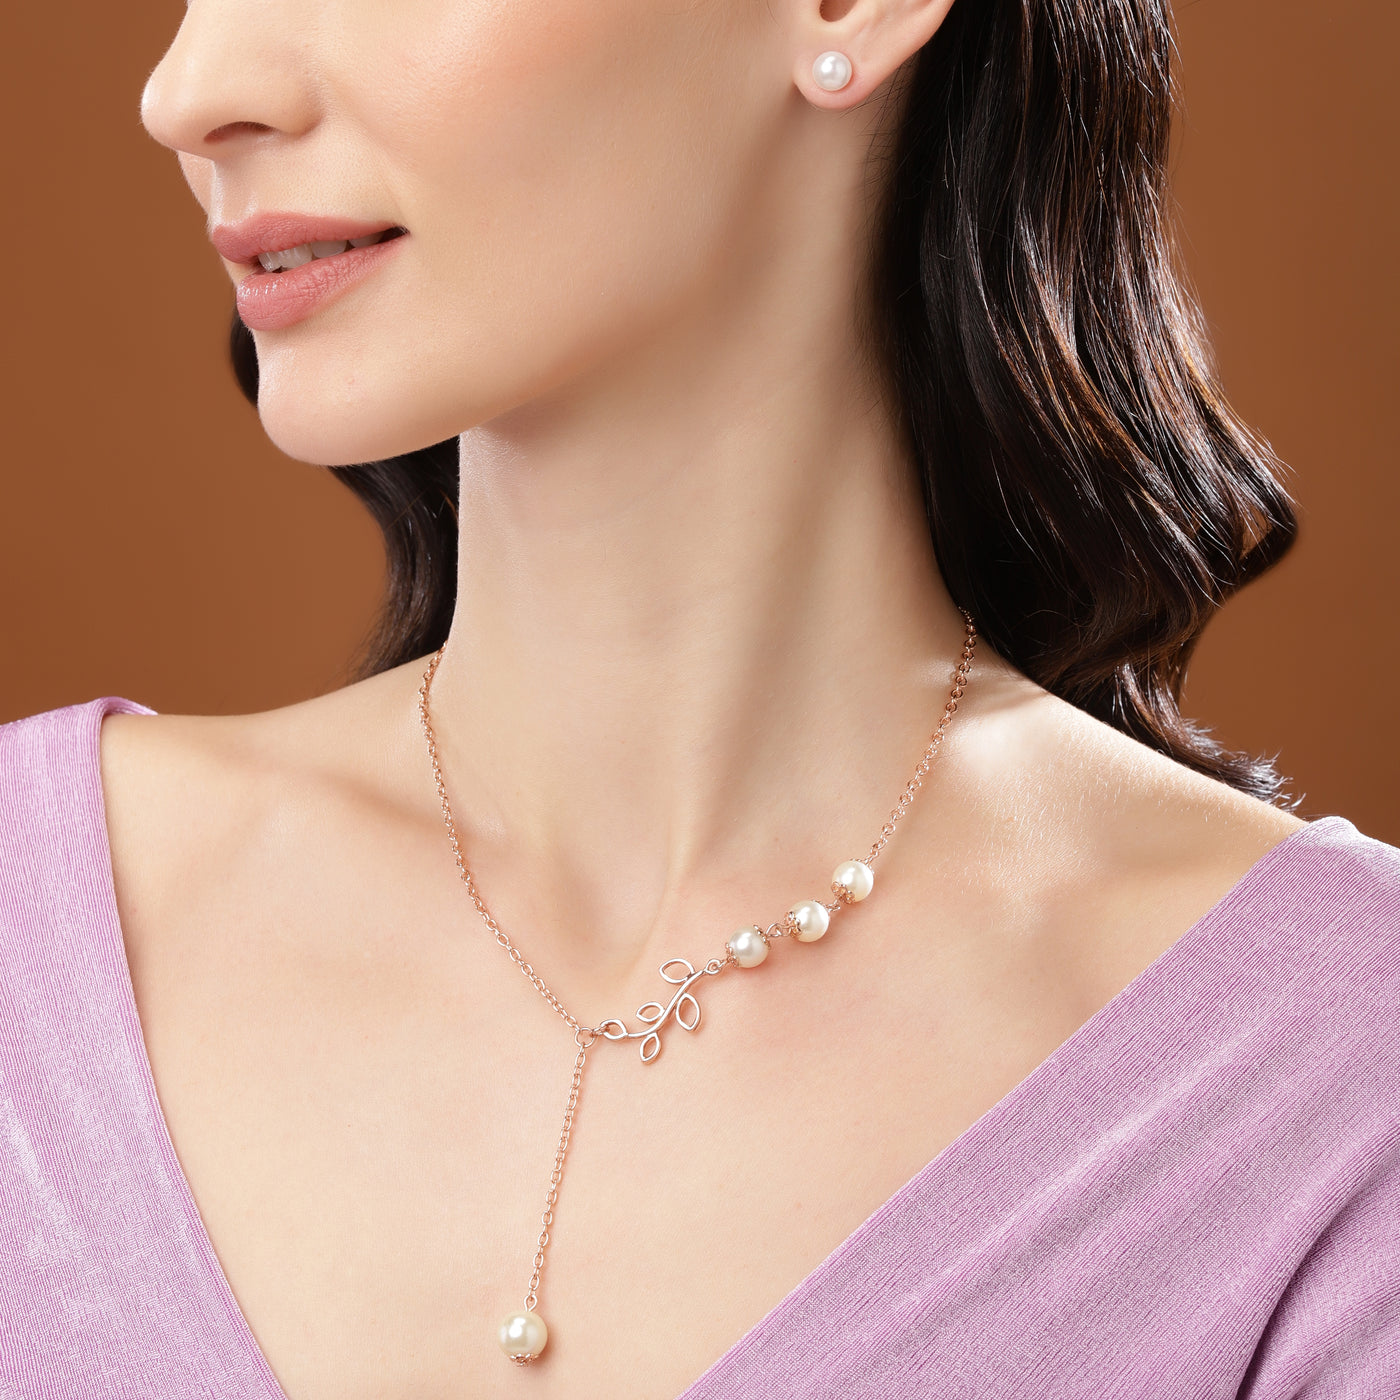 Estele Rose Gold Plated Beautiful Necklace Set with Pearls for Women